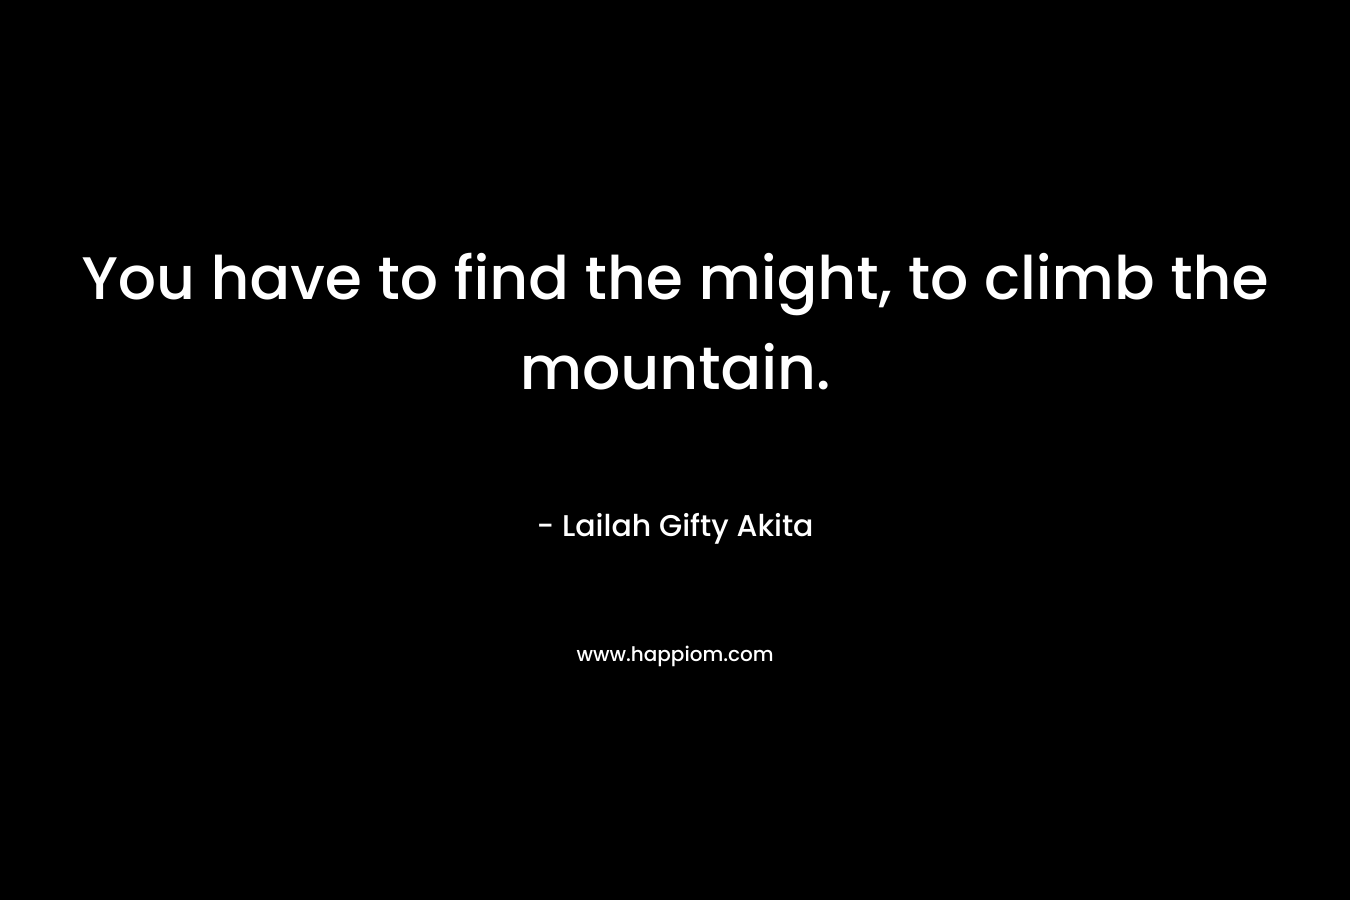 You have to find the might, to climb the mountain.